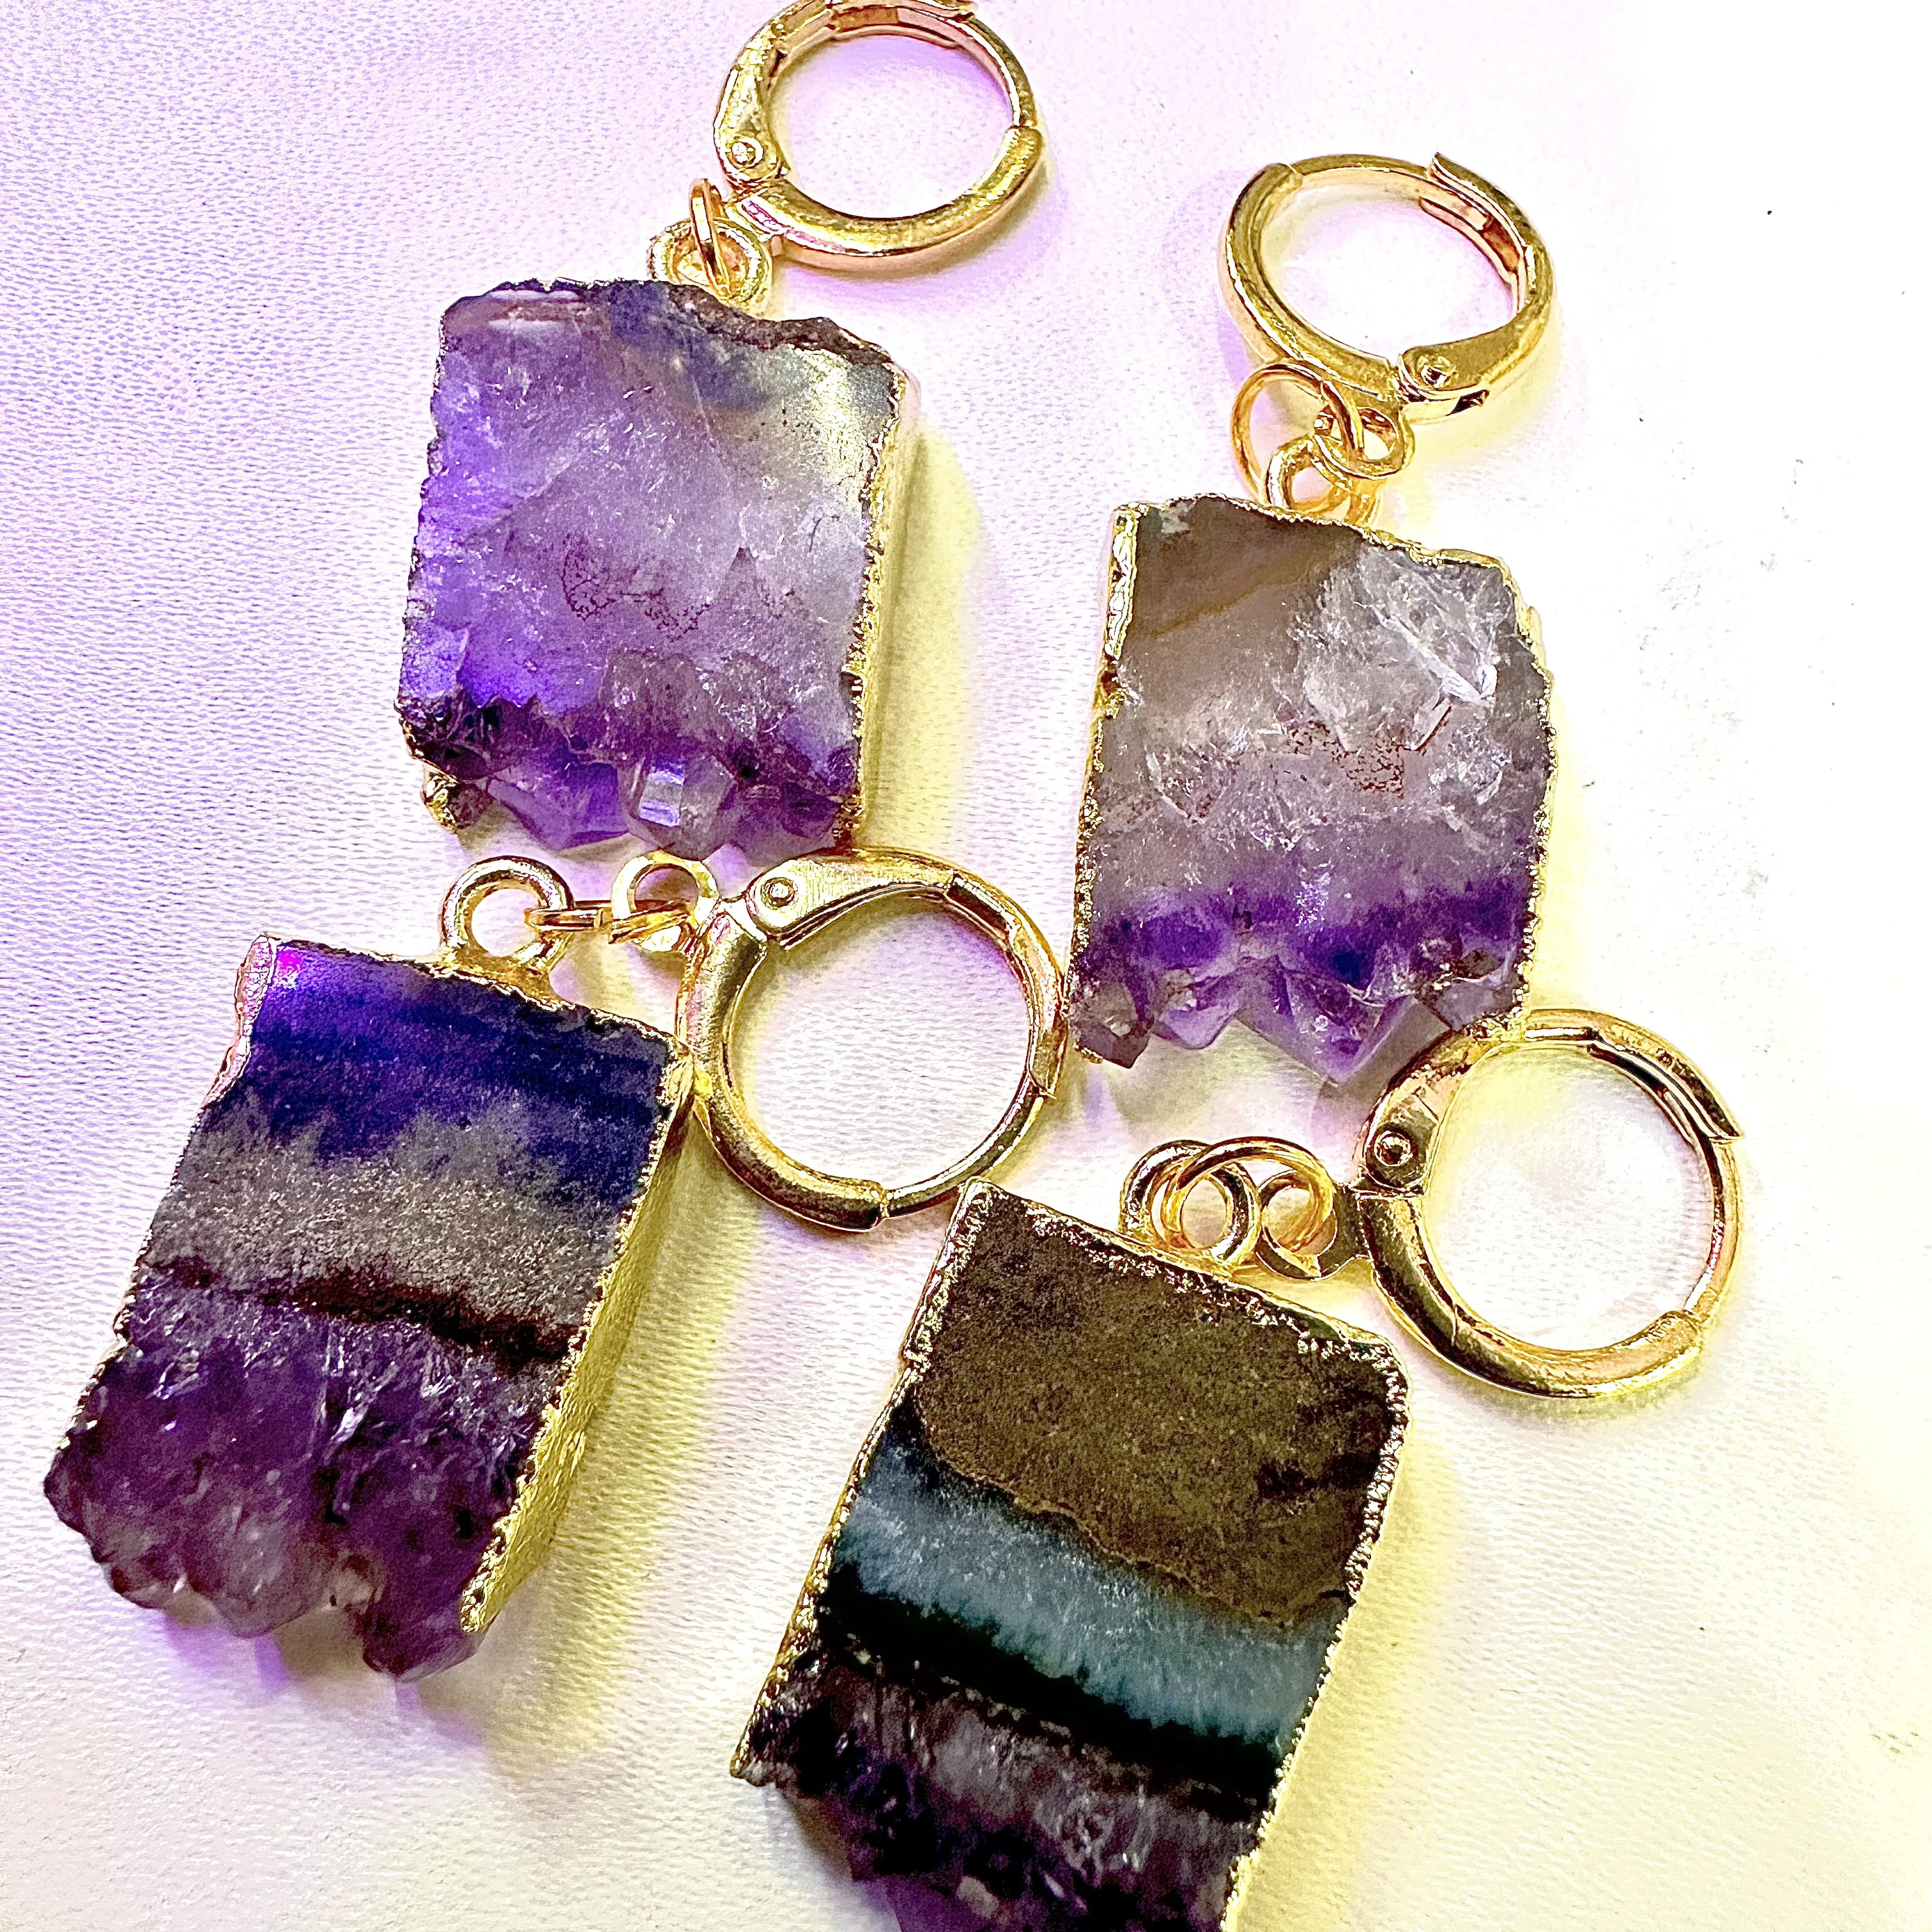 

Raw Purple Amethyst Druzy stone earrings for Female Cute Jewelry Gold Plated Crystal Stones Slice Cute Carve Rectangle Natural